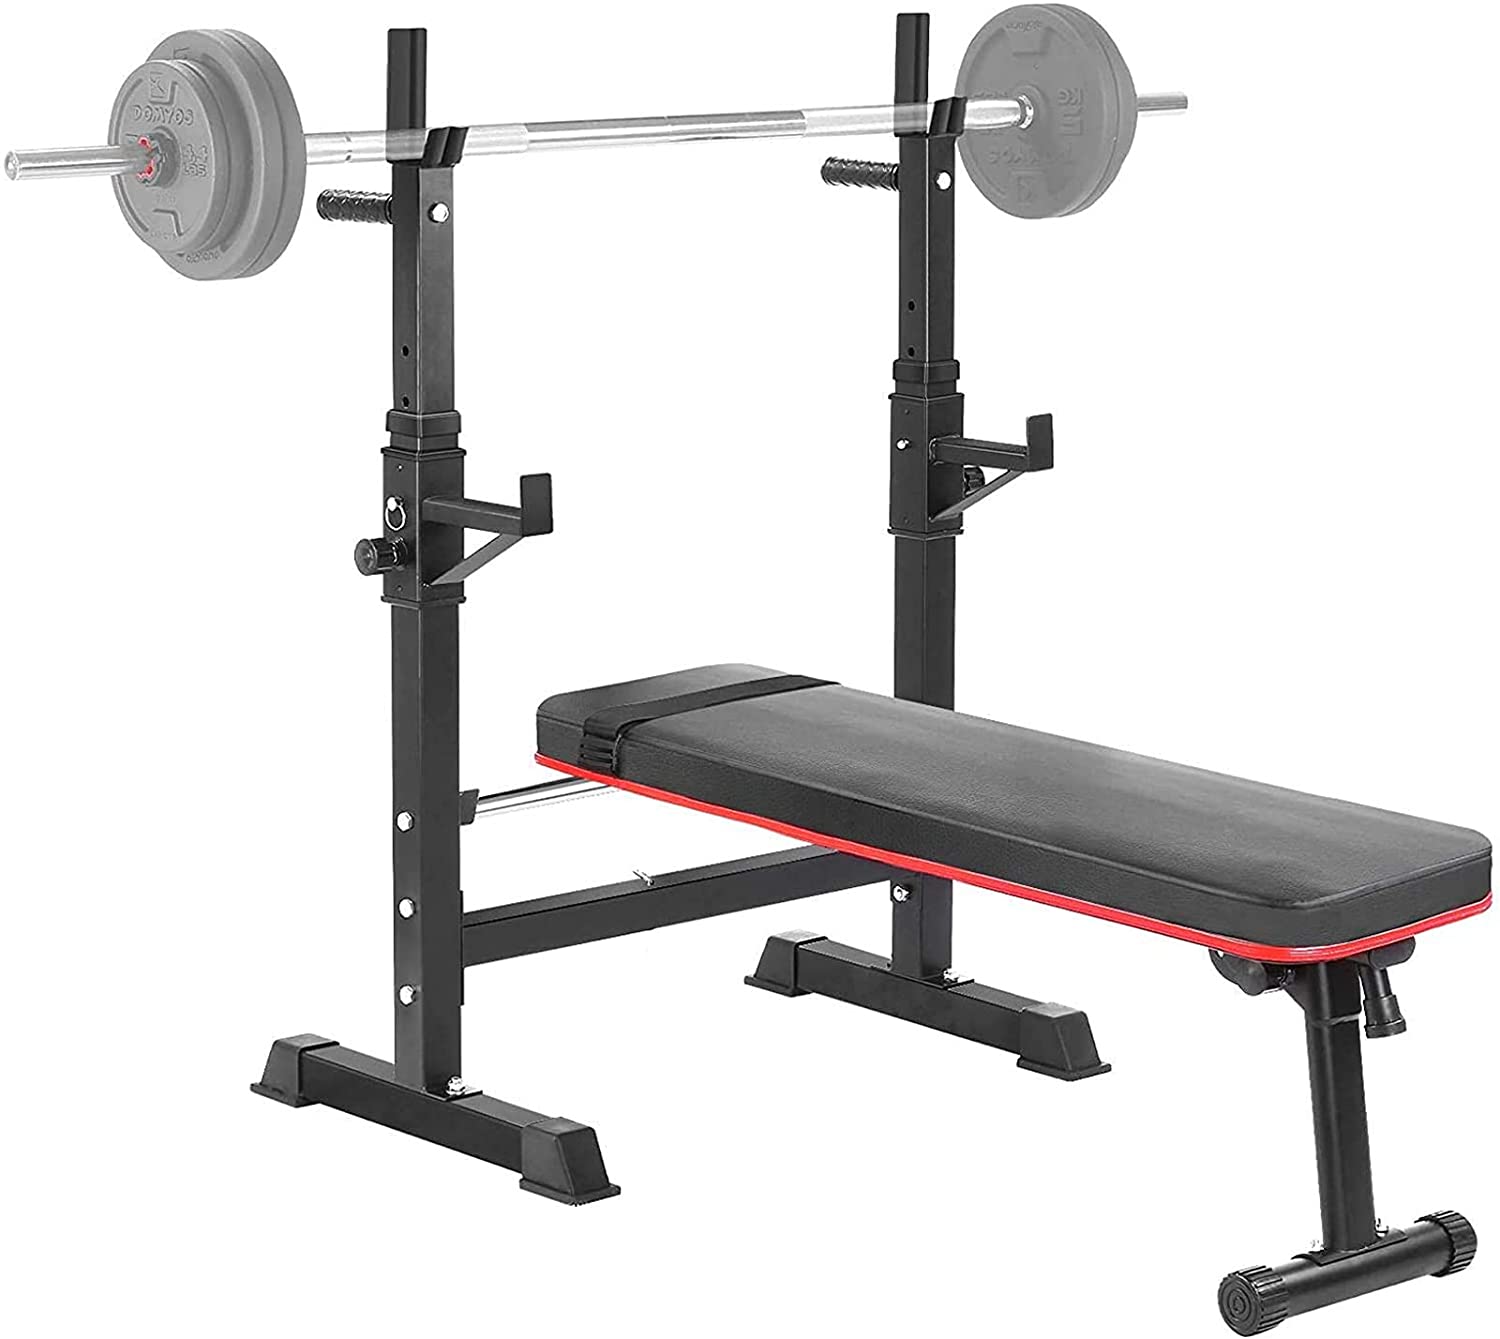 Multifunction Weight Bench, Training Bench with Barbell Rack, Foldable, Flat Bench, Workout Bench and Squat Rack Up To 200 Kg - adamshealthstore